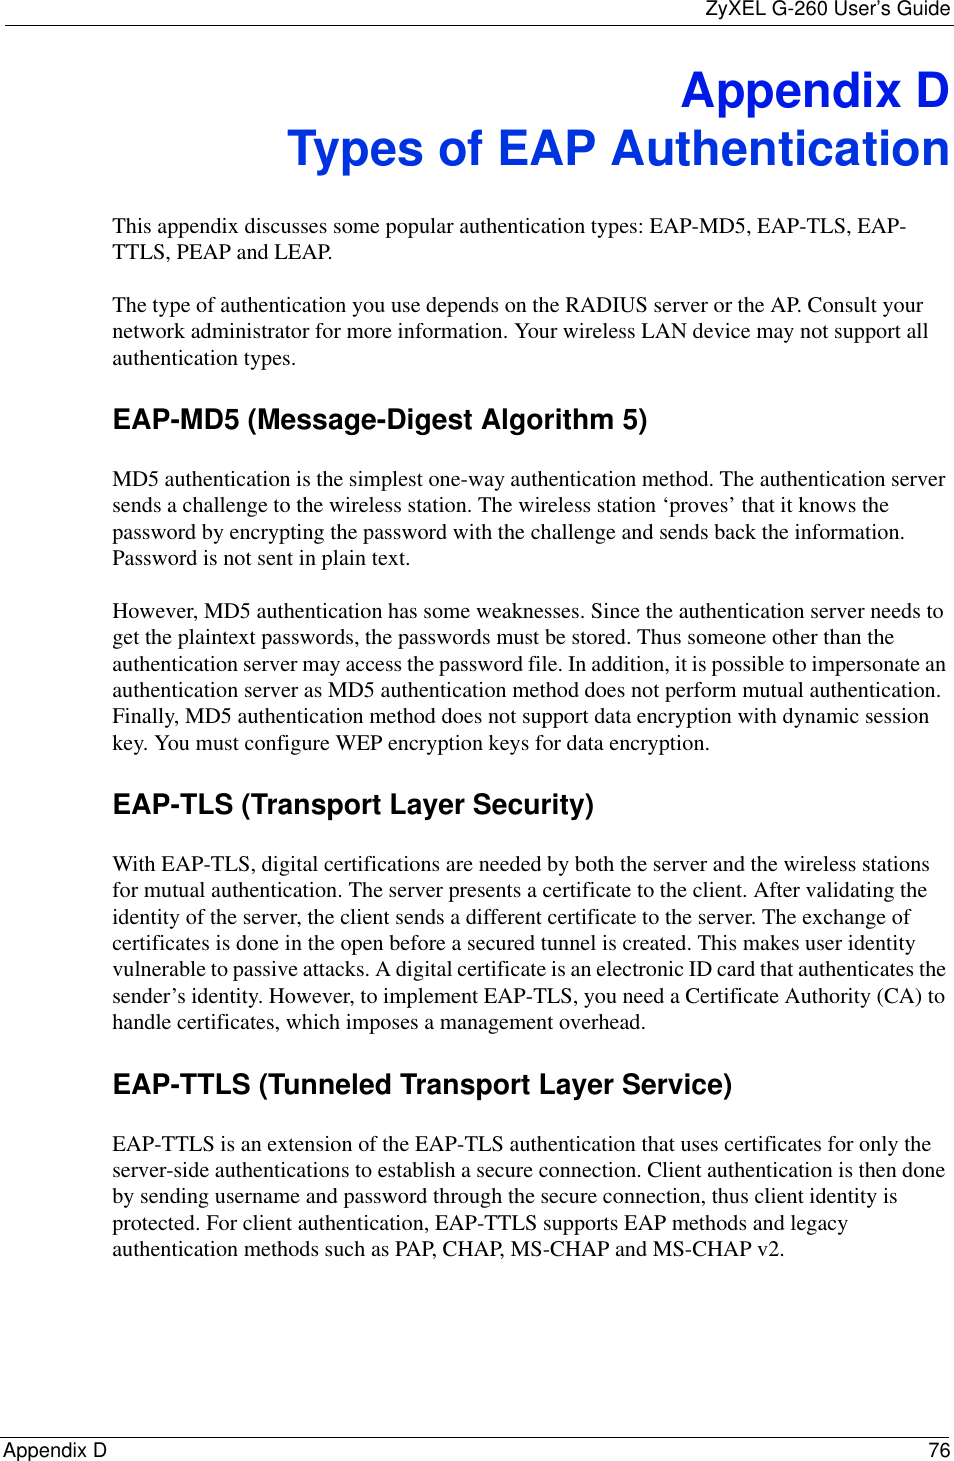 ZyXEL G-260 User’s GuideAppendix D 76Appendix DTypes of EAP AuthenticationThis appendix discusses some popular authentication types: EAP-MD5, EAP-TLS, EAP-TTLS, PEAP and LEAP. The type of authentication you use depends on the RADIUS server or the AP. Consult your network administrator for more information. Your wireless LAN device may not support all authentication types. EAP-MD5 (Message-Digest Algorithm 5)MD5 authentication is the simplest one-way authentication method. The authentication server sends a challenge to the wireless station. The wireless station ‘proves’ that it knows the password by encrypting the password with the challenge and sends back the information. Password is not sent in plain text. However, MD5 authentication has some weaknesses. Since the authentication server needs to get the plaintext passwords, the passwords must be stored. Thus someone other than the authentication server may access the password file. In addition, it is possible to impersonate an authentication server as MD5 authentication method does not perform mutual authentication. Finally, MD5 authentication method does not support data encryption with dynamic session key. You must configure WEP encryption keys for data encryption. EAP-TLS (Transport Layer Security)With EAP-TLS, digital certifications are needed by both the server and the wireless stations for mutual authentication. The server presents a certificate to the client. After validating the identity of the server, the client sends a different certificate to the server. The exchange of certificates is done in the open before a secured tunnel is created. This makes user identity vulnerable to passive attacks. A digital certificate is an electronic ID card that authenticates the sender’s identity. However, to implement EAP-TLS, you need a Certificate Authority (CA) to handle certificates, which imposes a management overhead. EAP-TTLS (Tunneled Transport Layer Service) EAP-TTLS is an extension of the EAP-TLS authentication that uses certificates for only the server-side authentications to establish a secure connection. Client authentication is then done by sending username and password through the secure connection, thus client identity is protected. For client authentication, EAP-TTLS supports EAP methods and legacy authentication methods such as PAP, CHAP, MS-CHAP and MS-CHAP v2. 